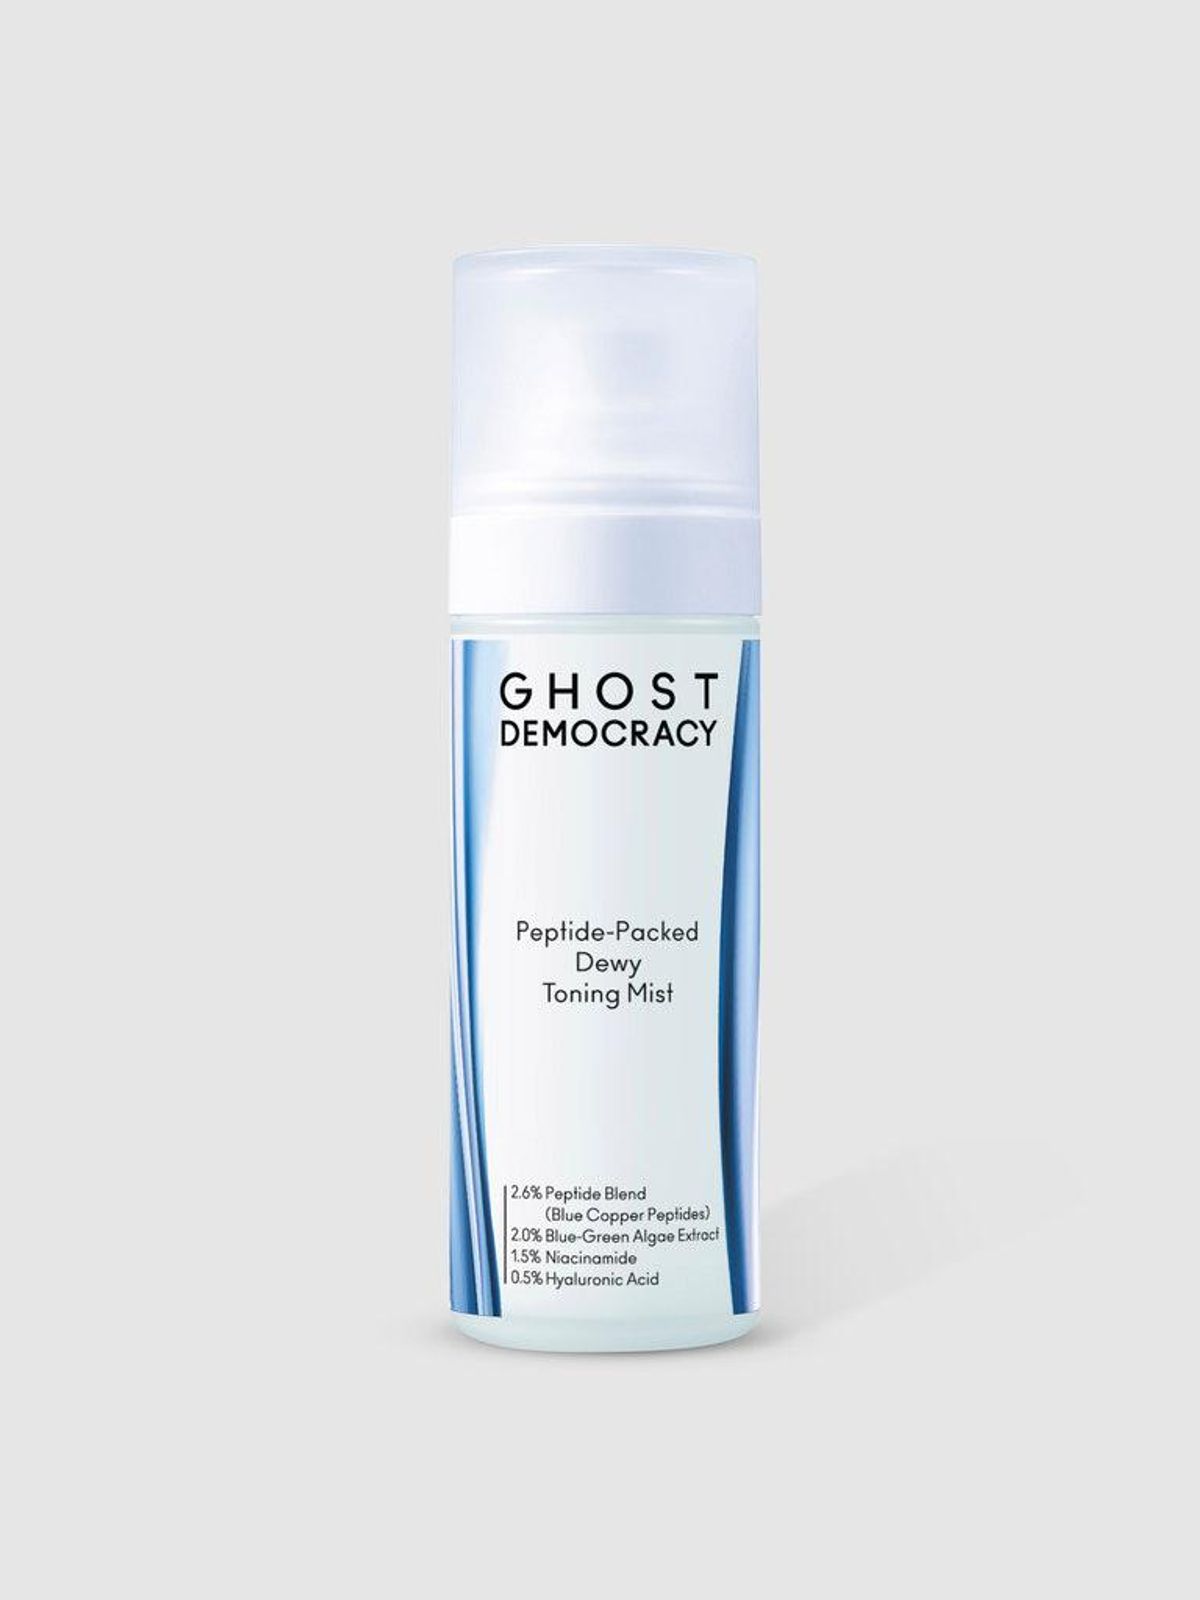 ghost democracy peptide packed dewy toning mist